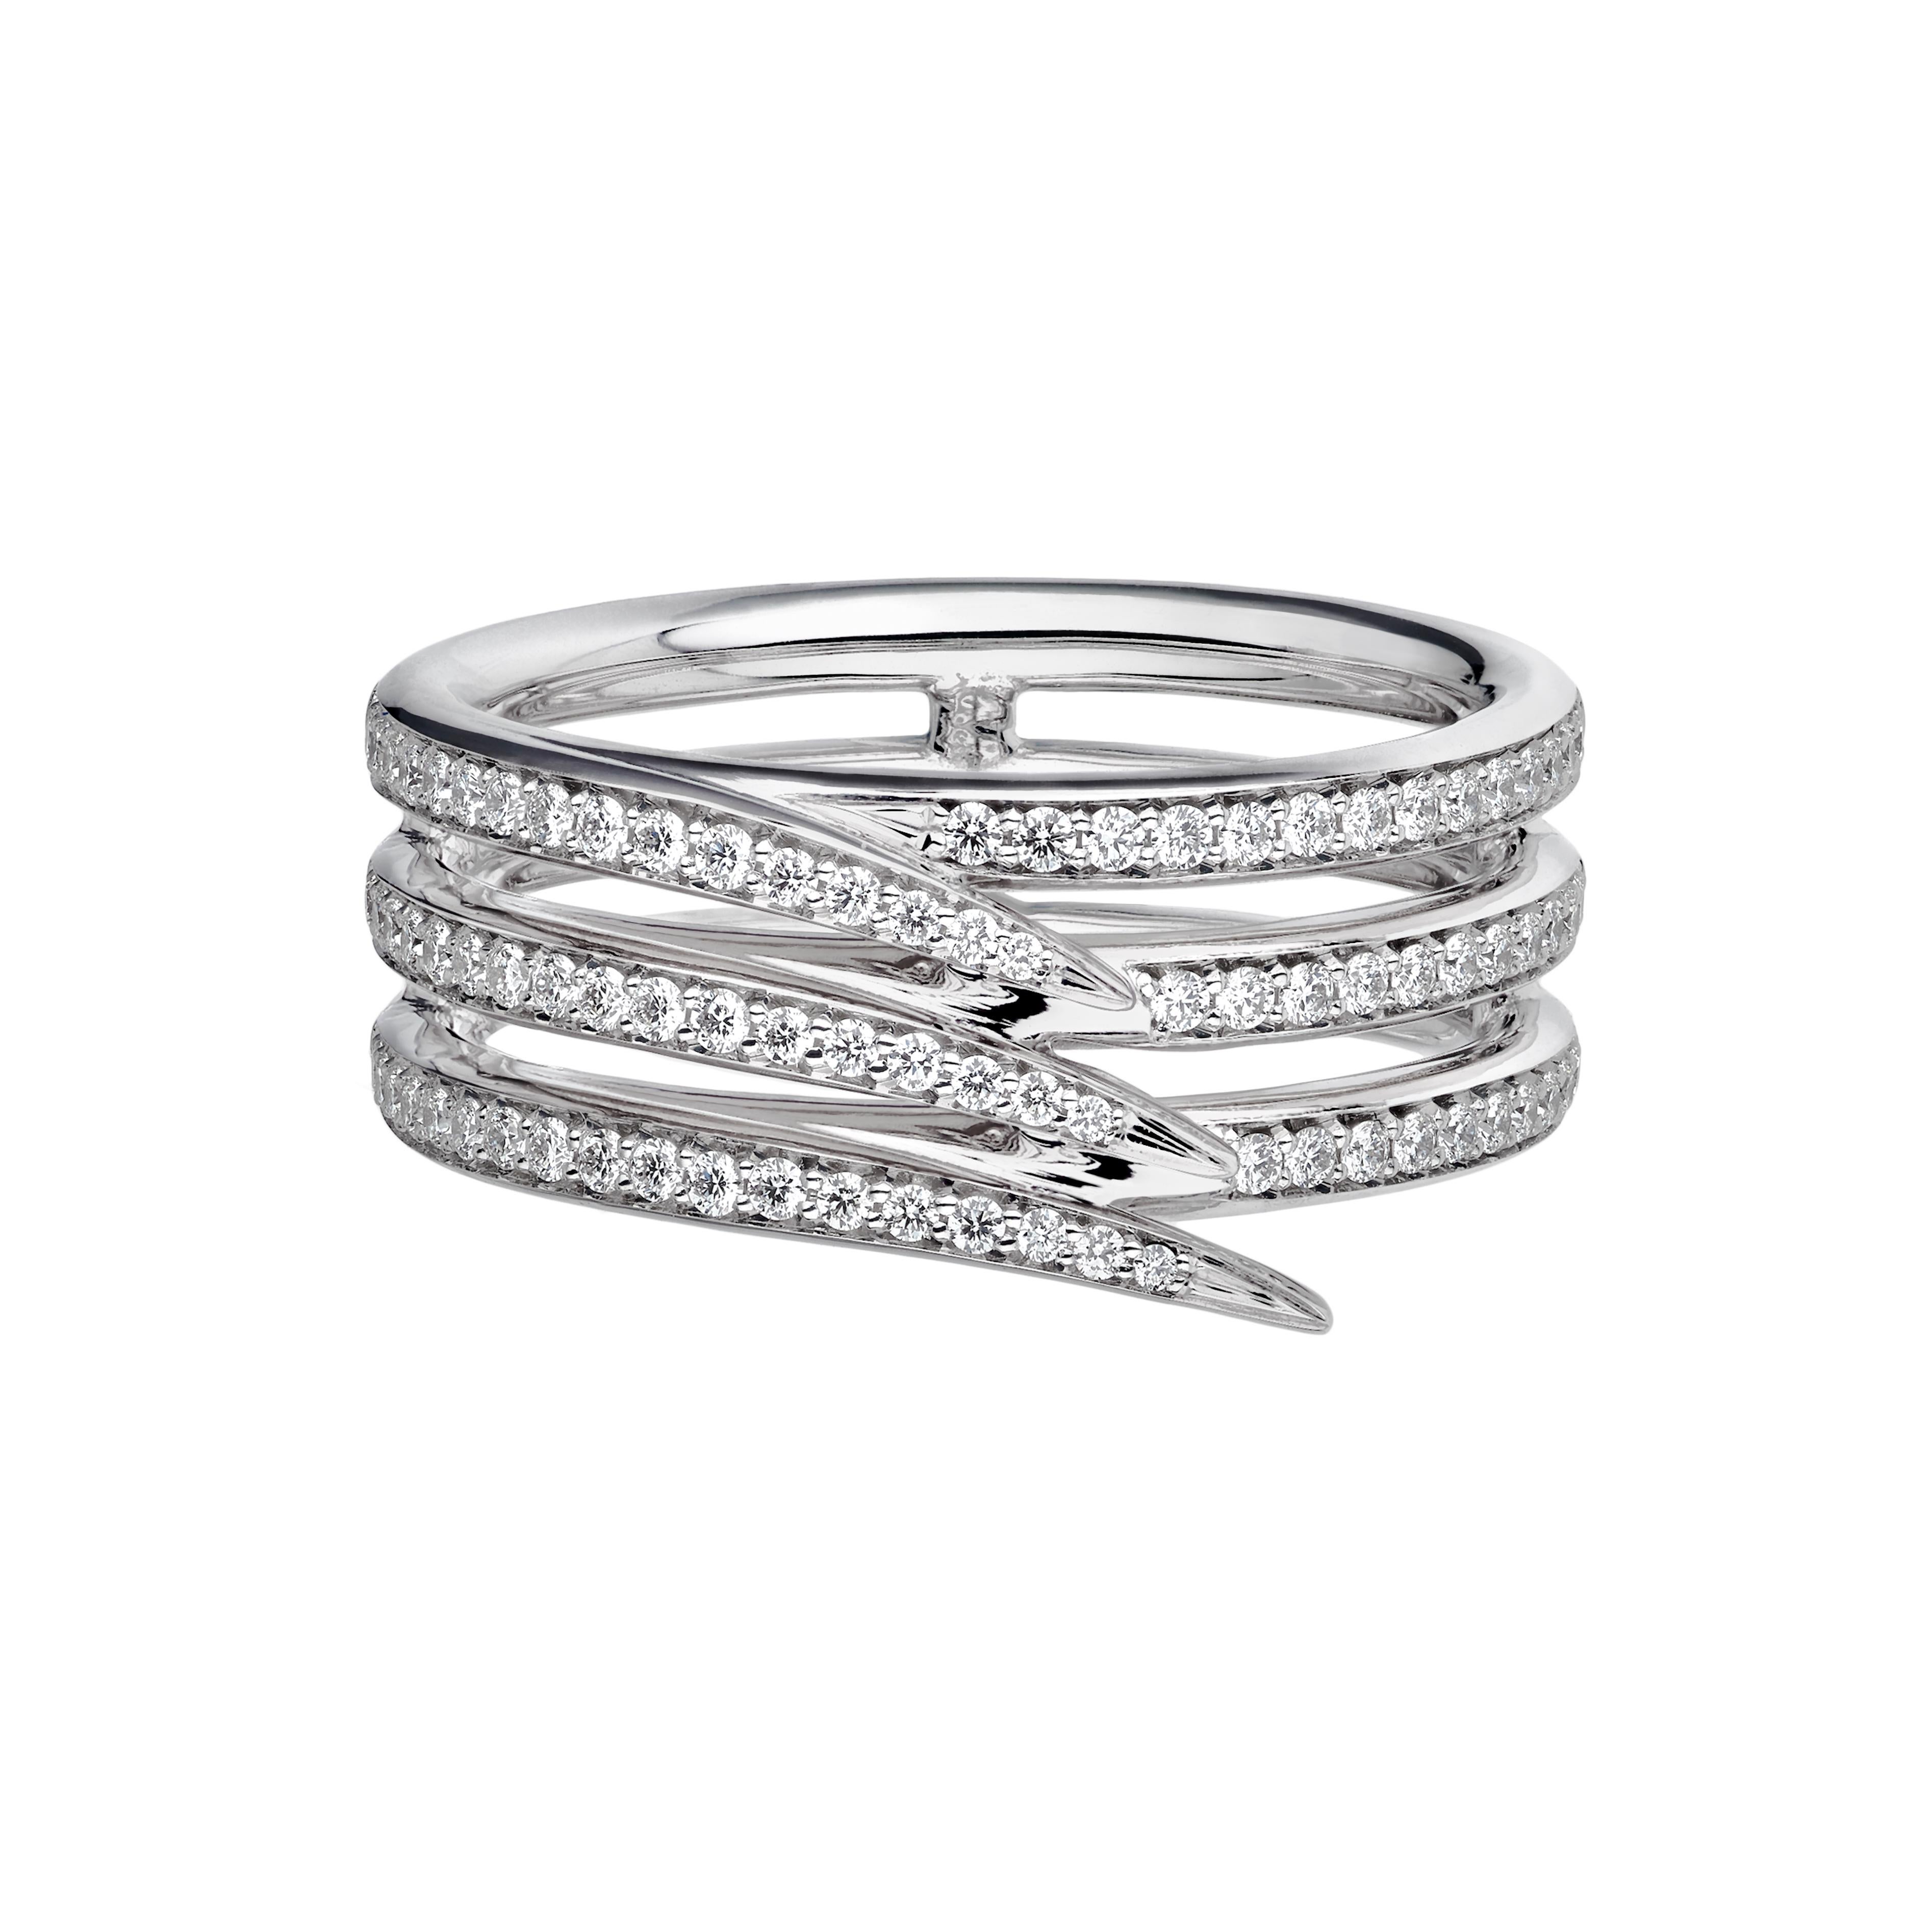 Armis Triple Row Ring is crafted from 18ct white gold and 0.67cts of brilliant white diamonds, a classic piece by the House of Shaun Leane. Designed to be worn as a “duo” with other interlocking Armis rings, a sequence of diamond pavé curves enclose